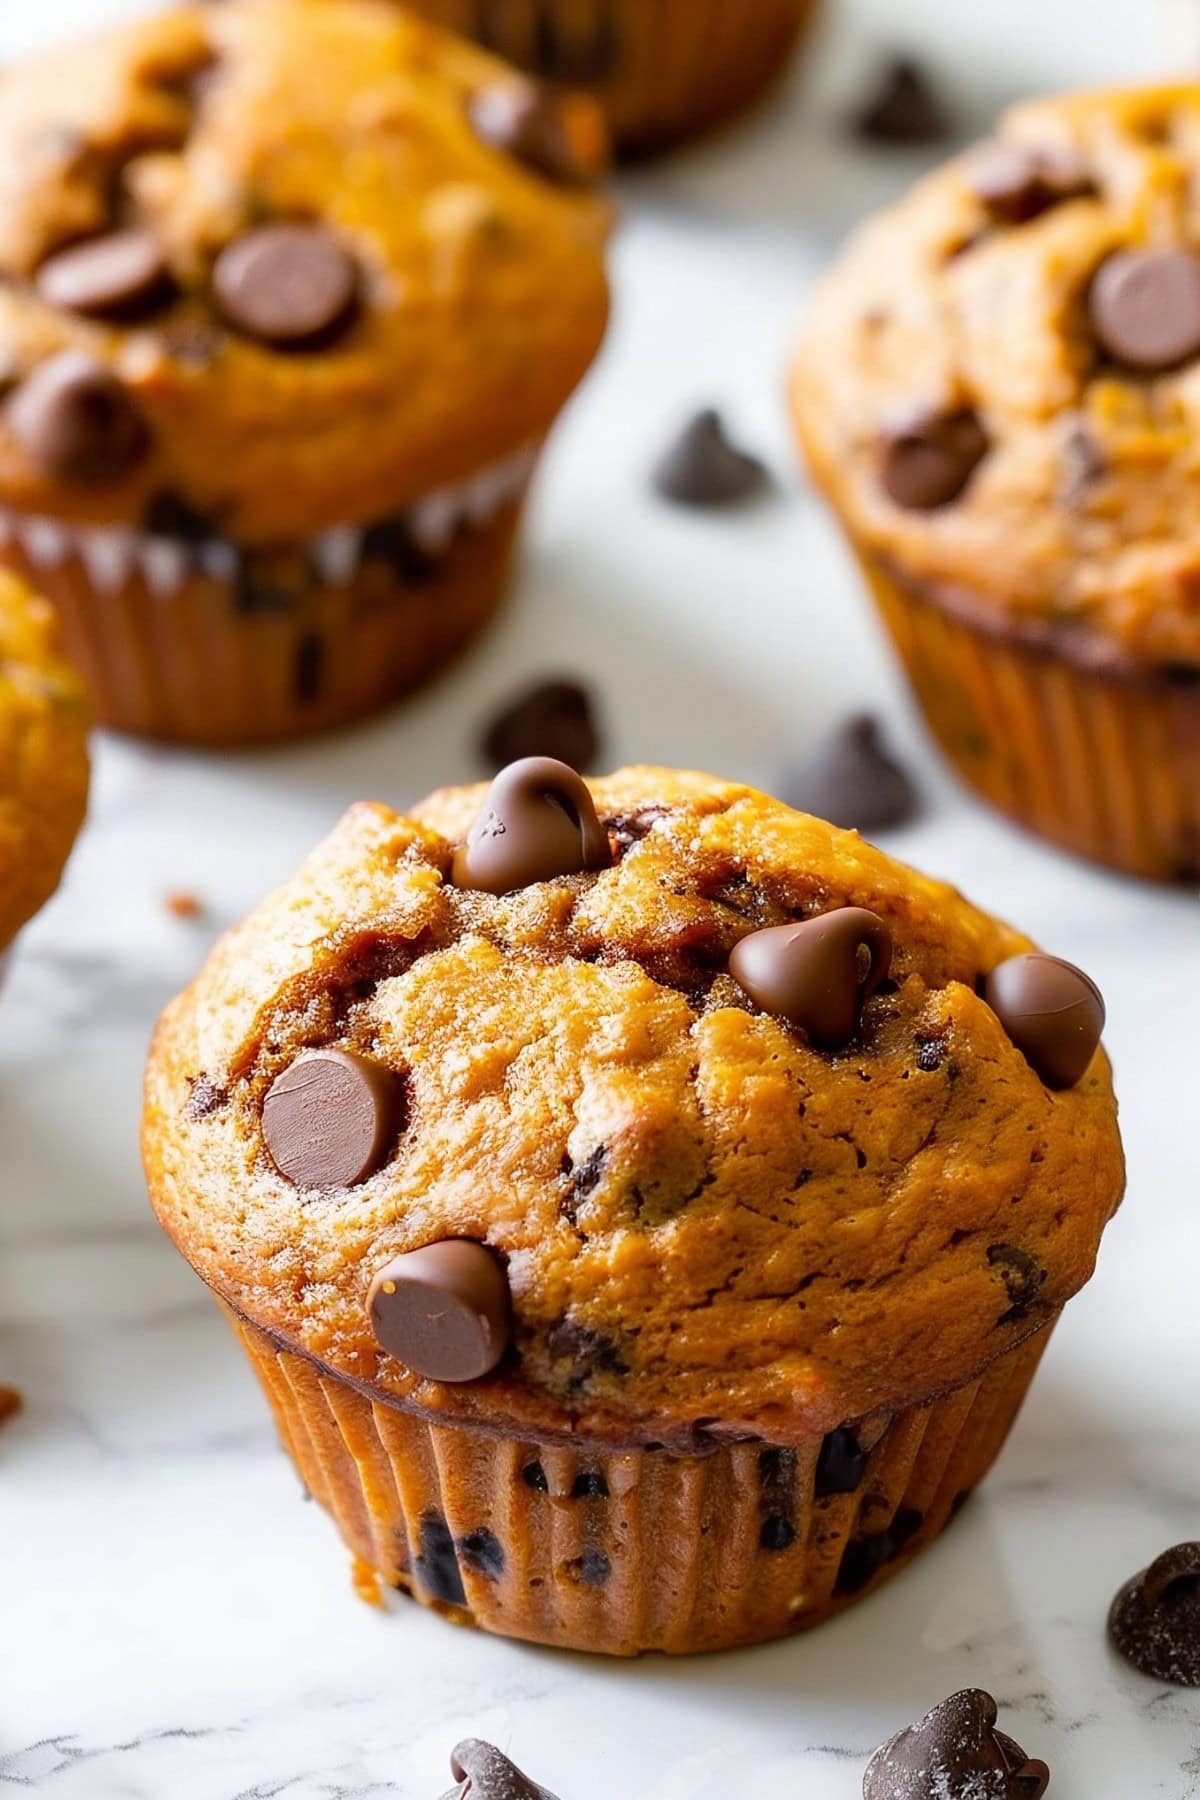 Super Close Up of Pumpkin Chocolate Chip Muffin on a White Marble Table with More Muffins in the Background